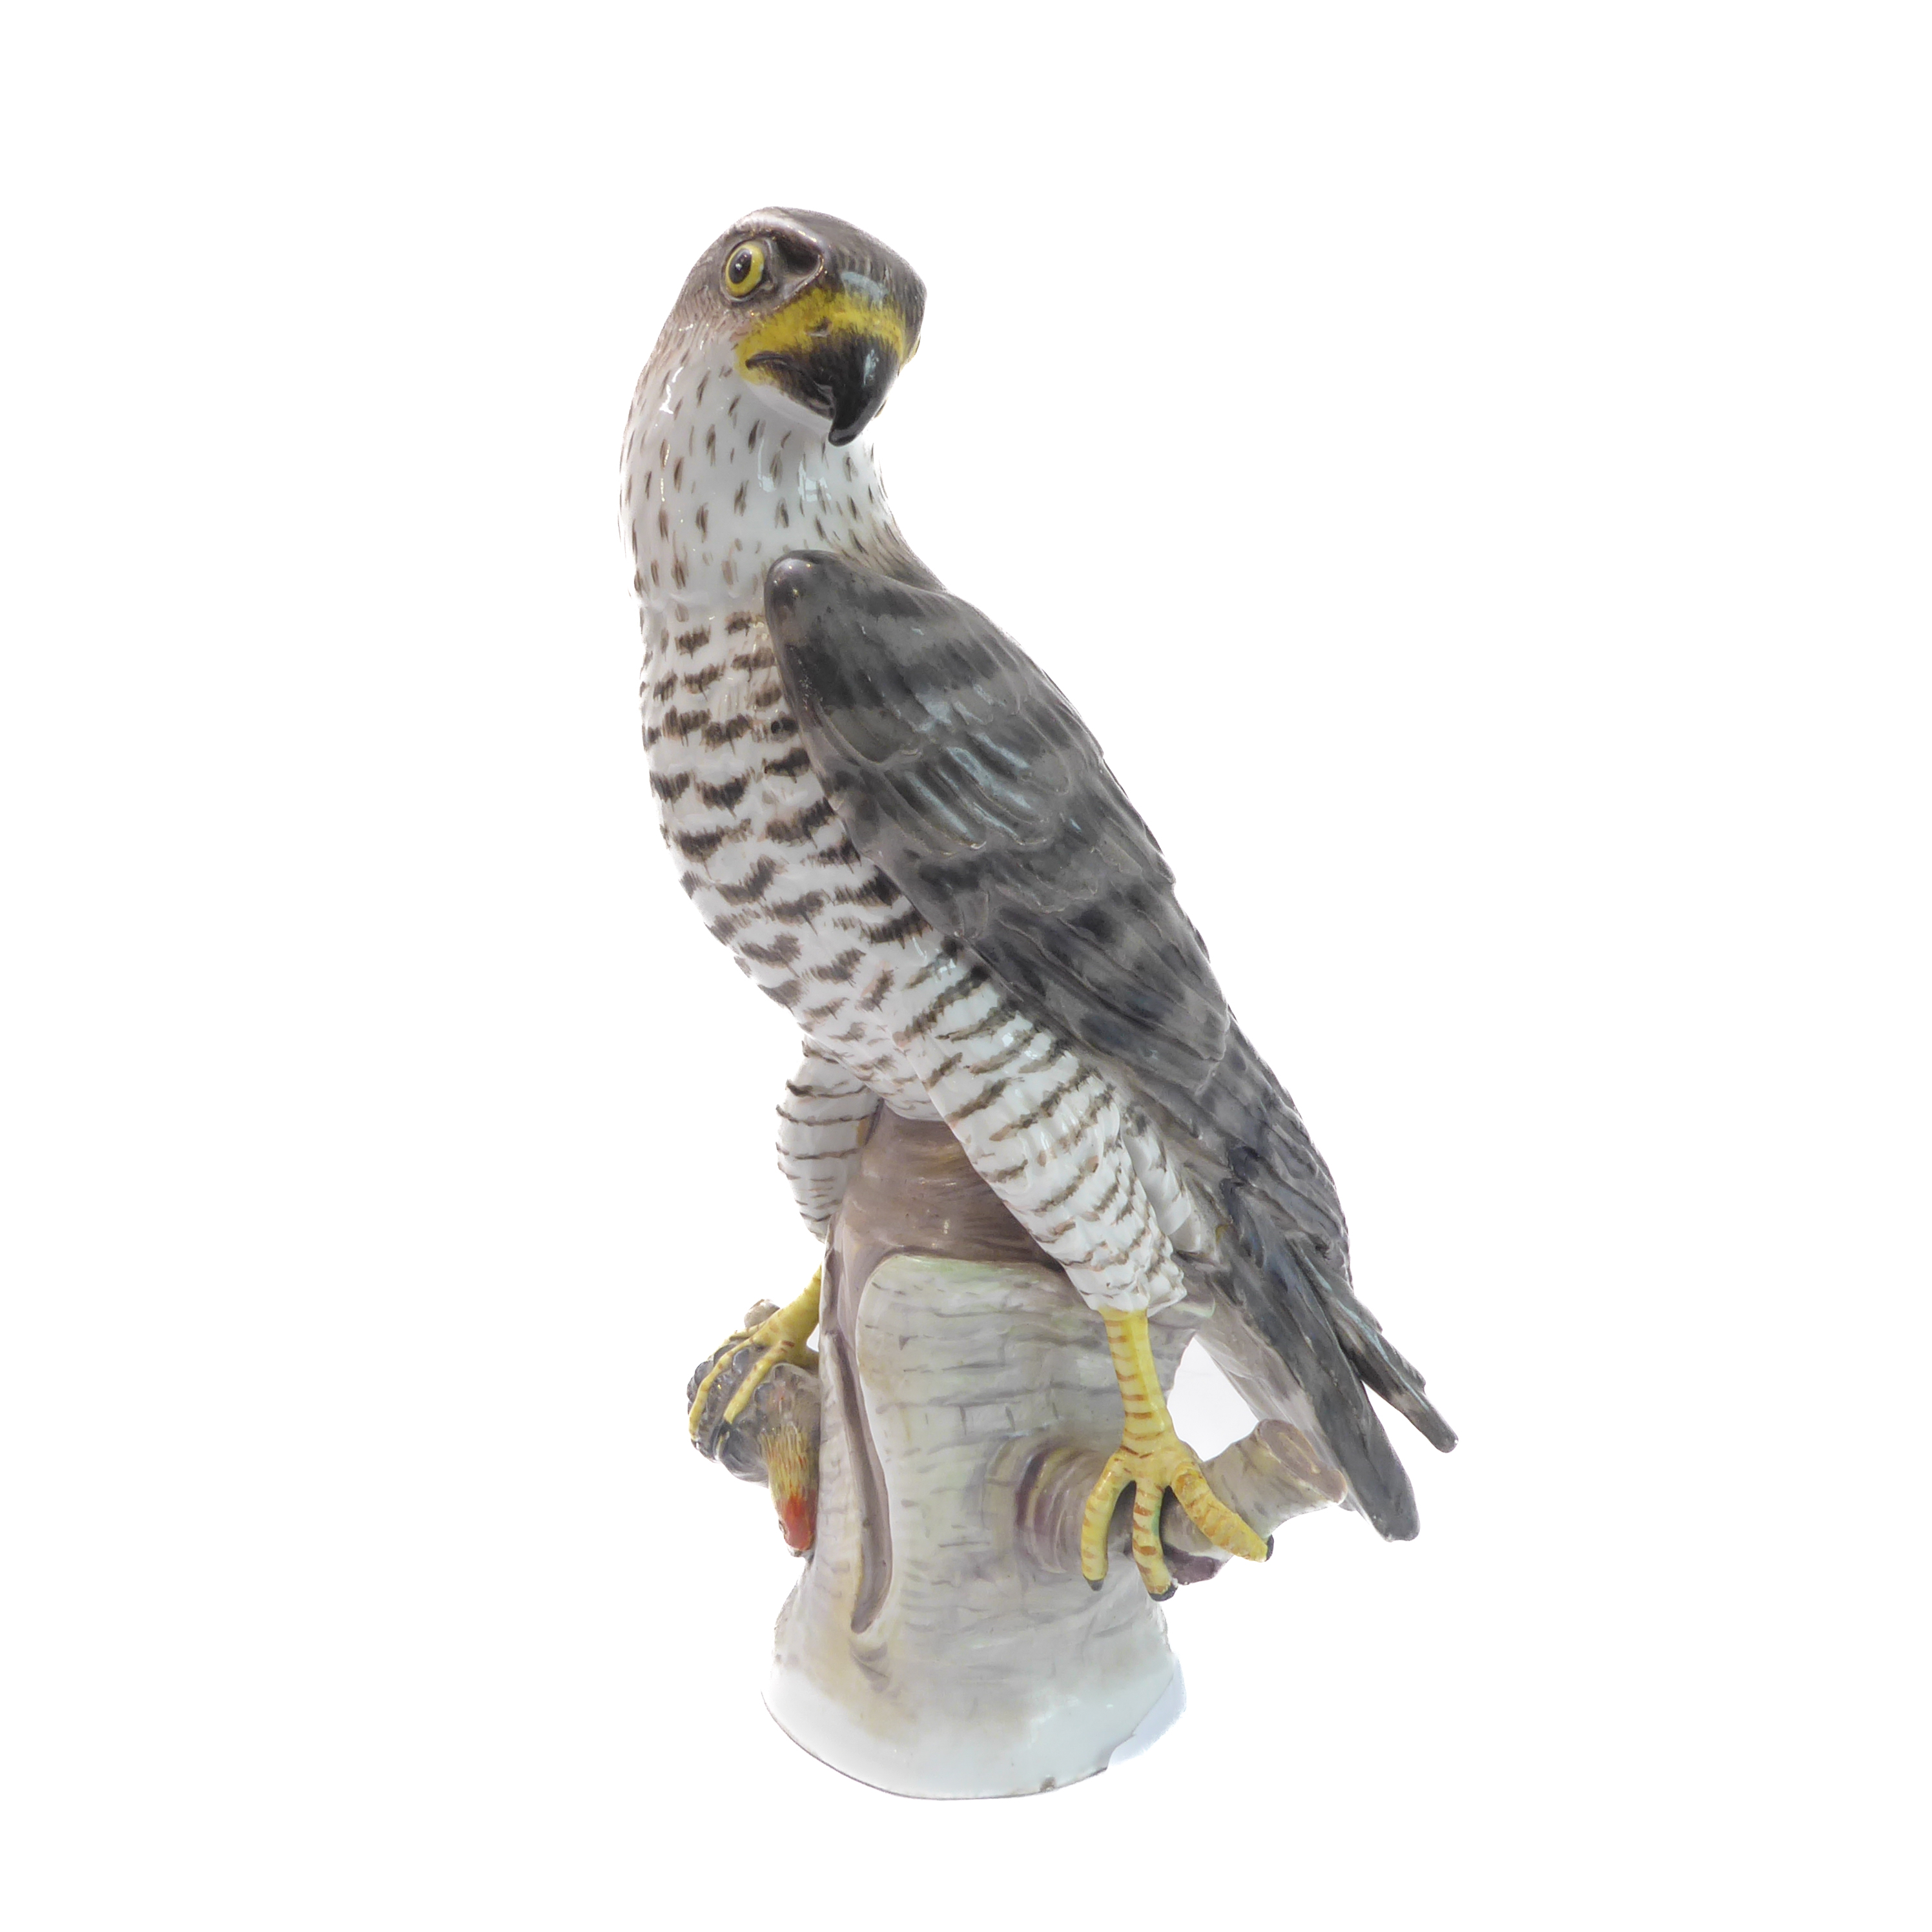 An early 20th century hand-decorated German porcelain model of a goshawk perched on a branch with